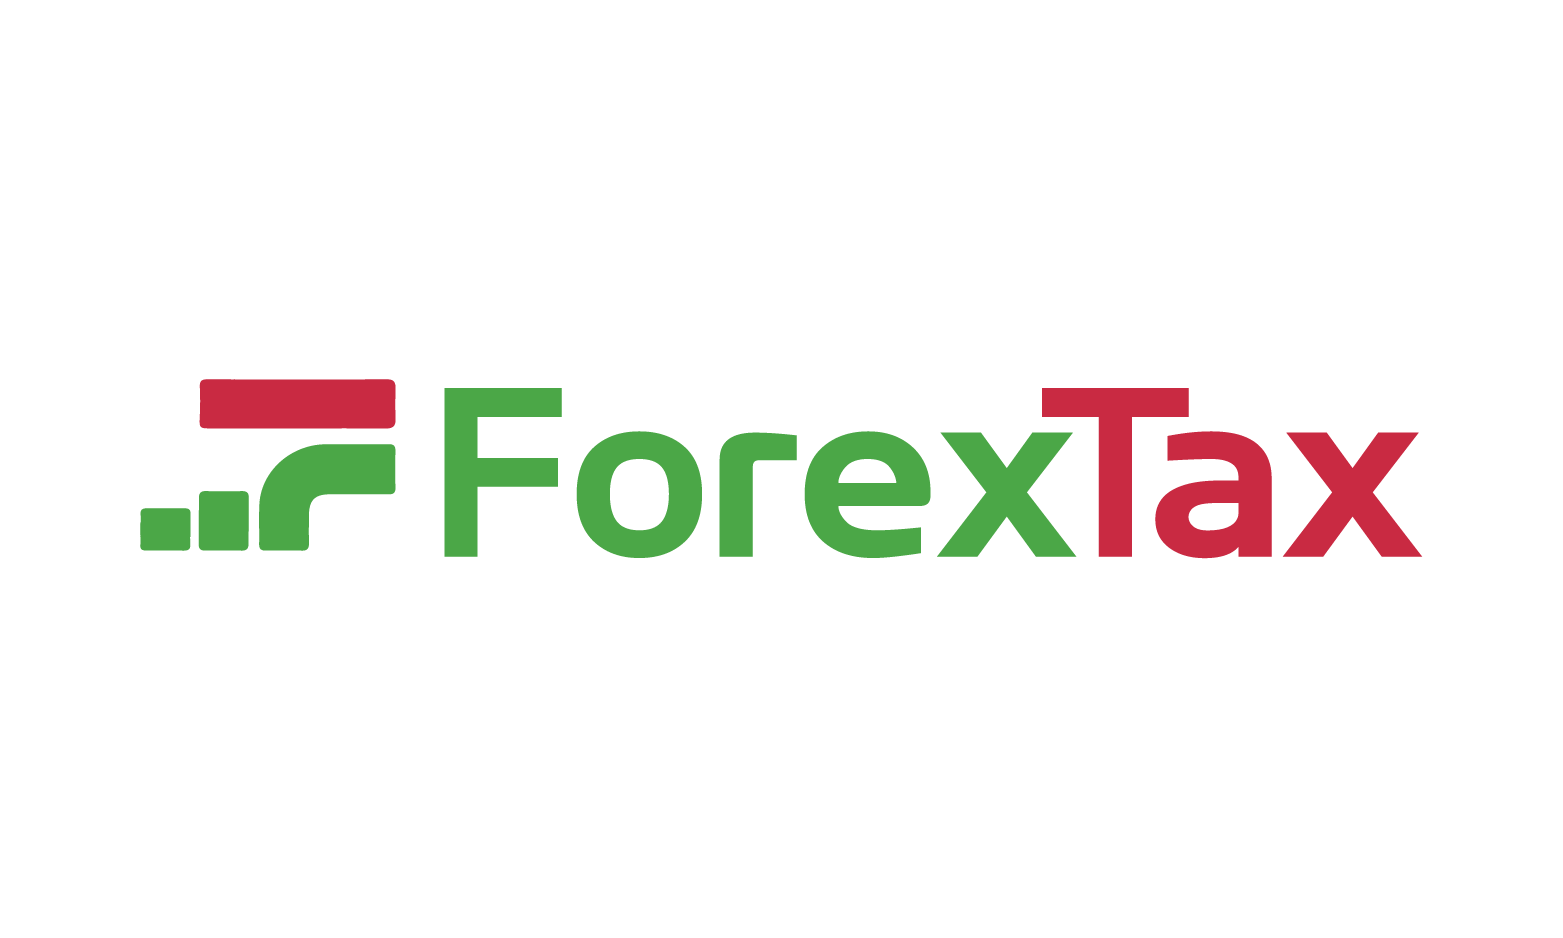 ForexTax.com - Creative brandable domain for sale